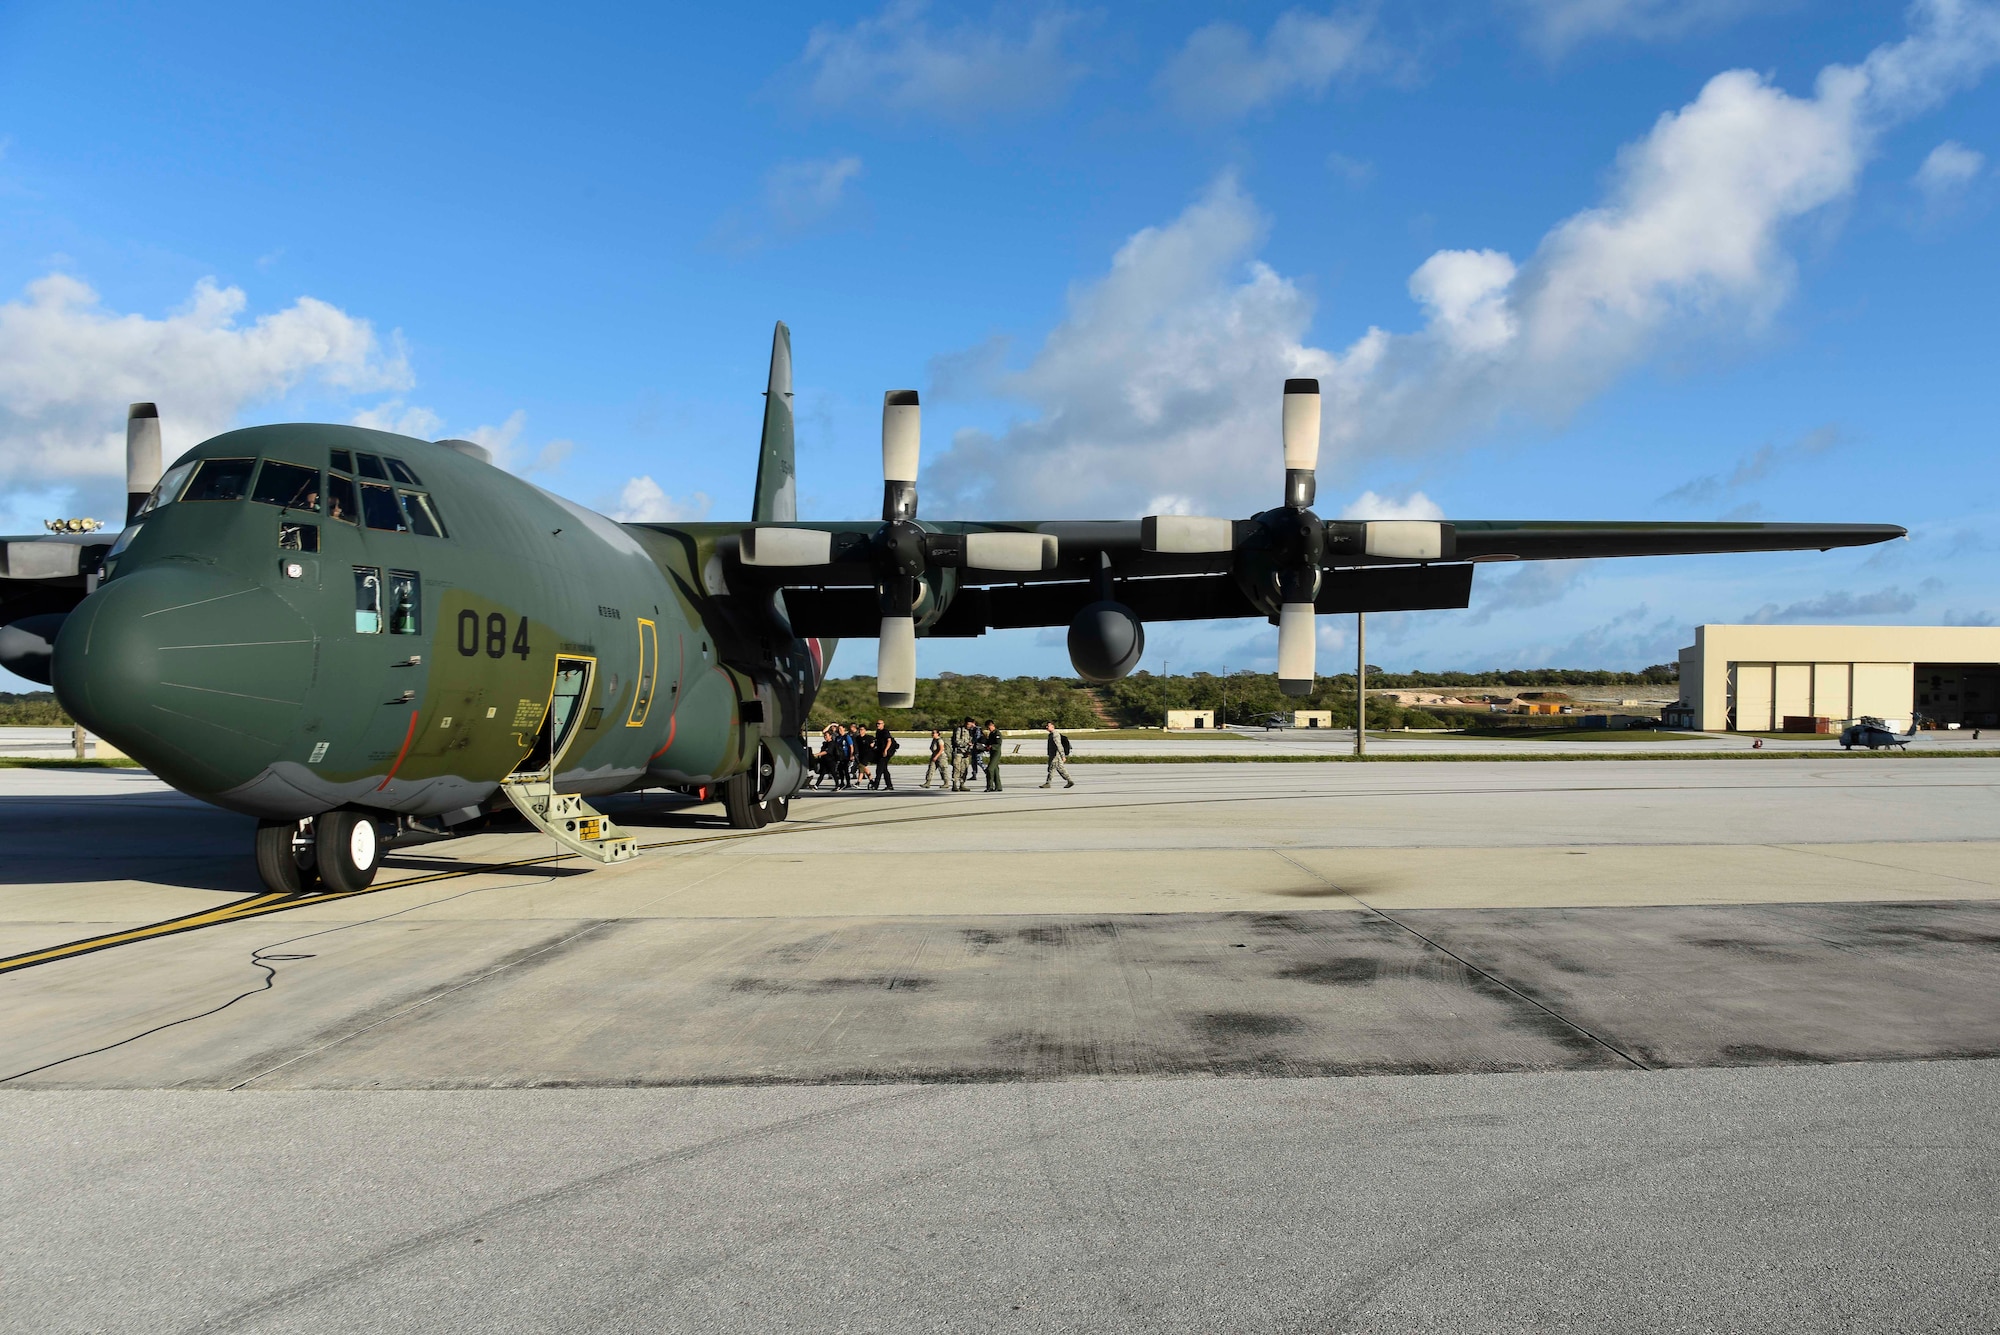 Service members from the United States, Royal Australian Air Force, and Japanese Air Self-Defense Force board a JASDF C-130H for an exercise scenario during Cope North 2019 Feb. 27, 2019, at Andersen Air Force Base, Guam. Service members from the U.S., Royal Australian Air Force, and the Japan Air Self-Defense Force exercised their Humanitarian Assistance and Disaster Relief skills together on Tinian by providing emergency medical care and secure transportation for simulated patients.(U.S. Air Force photo by Tech. Sgt. Jake Barreiro)